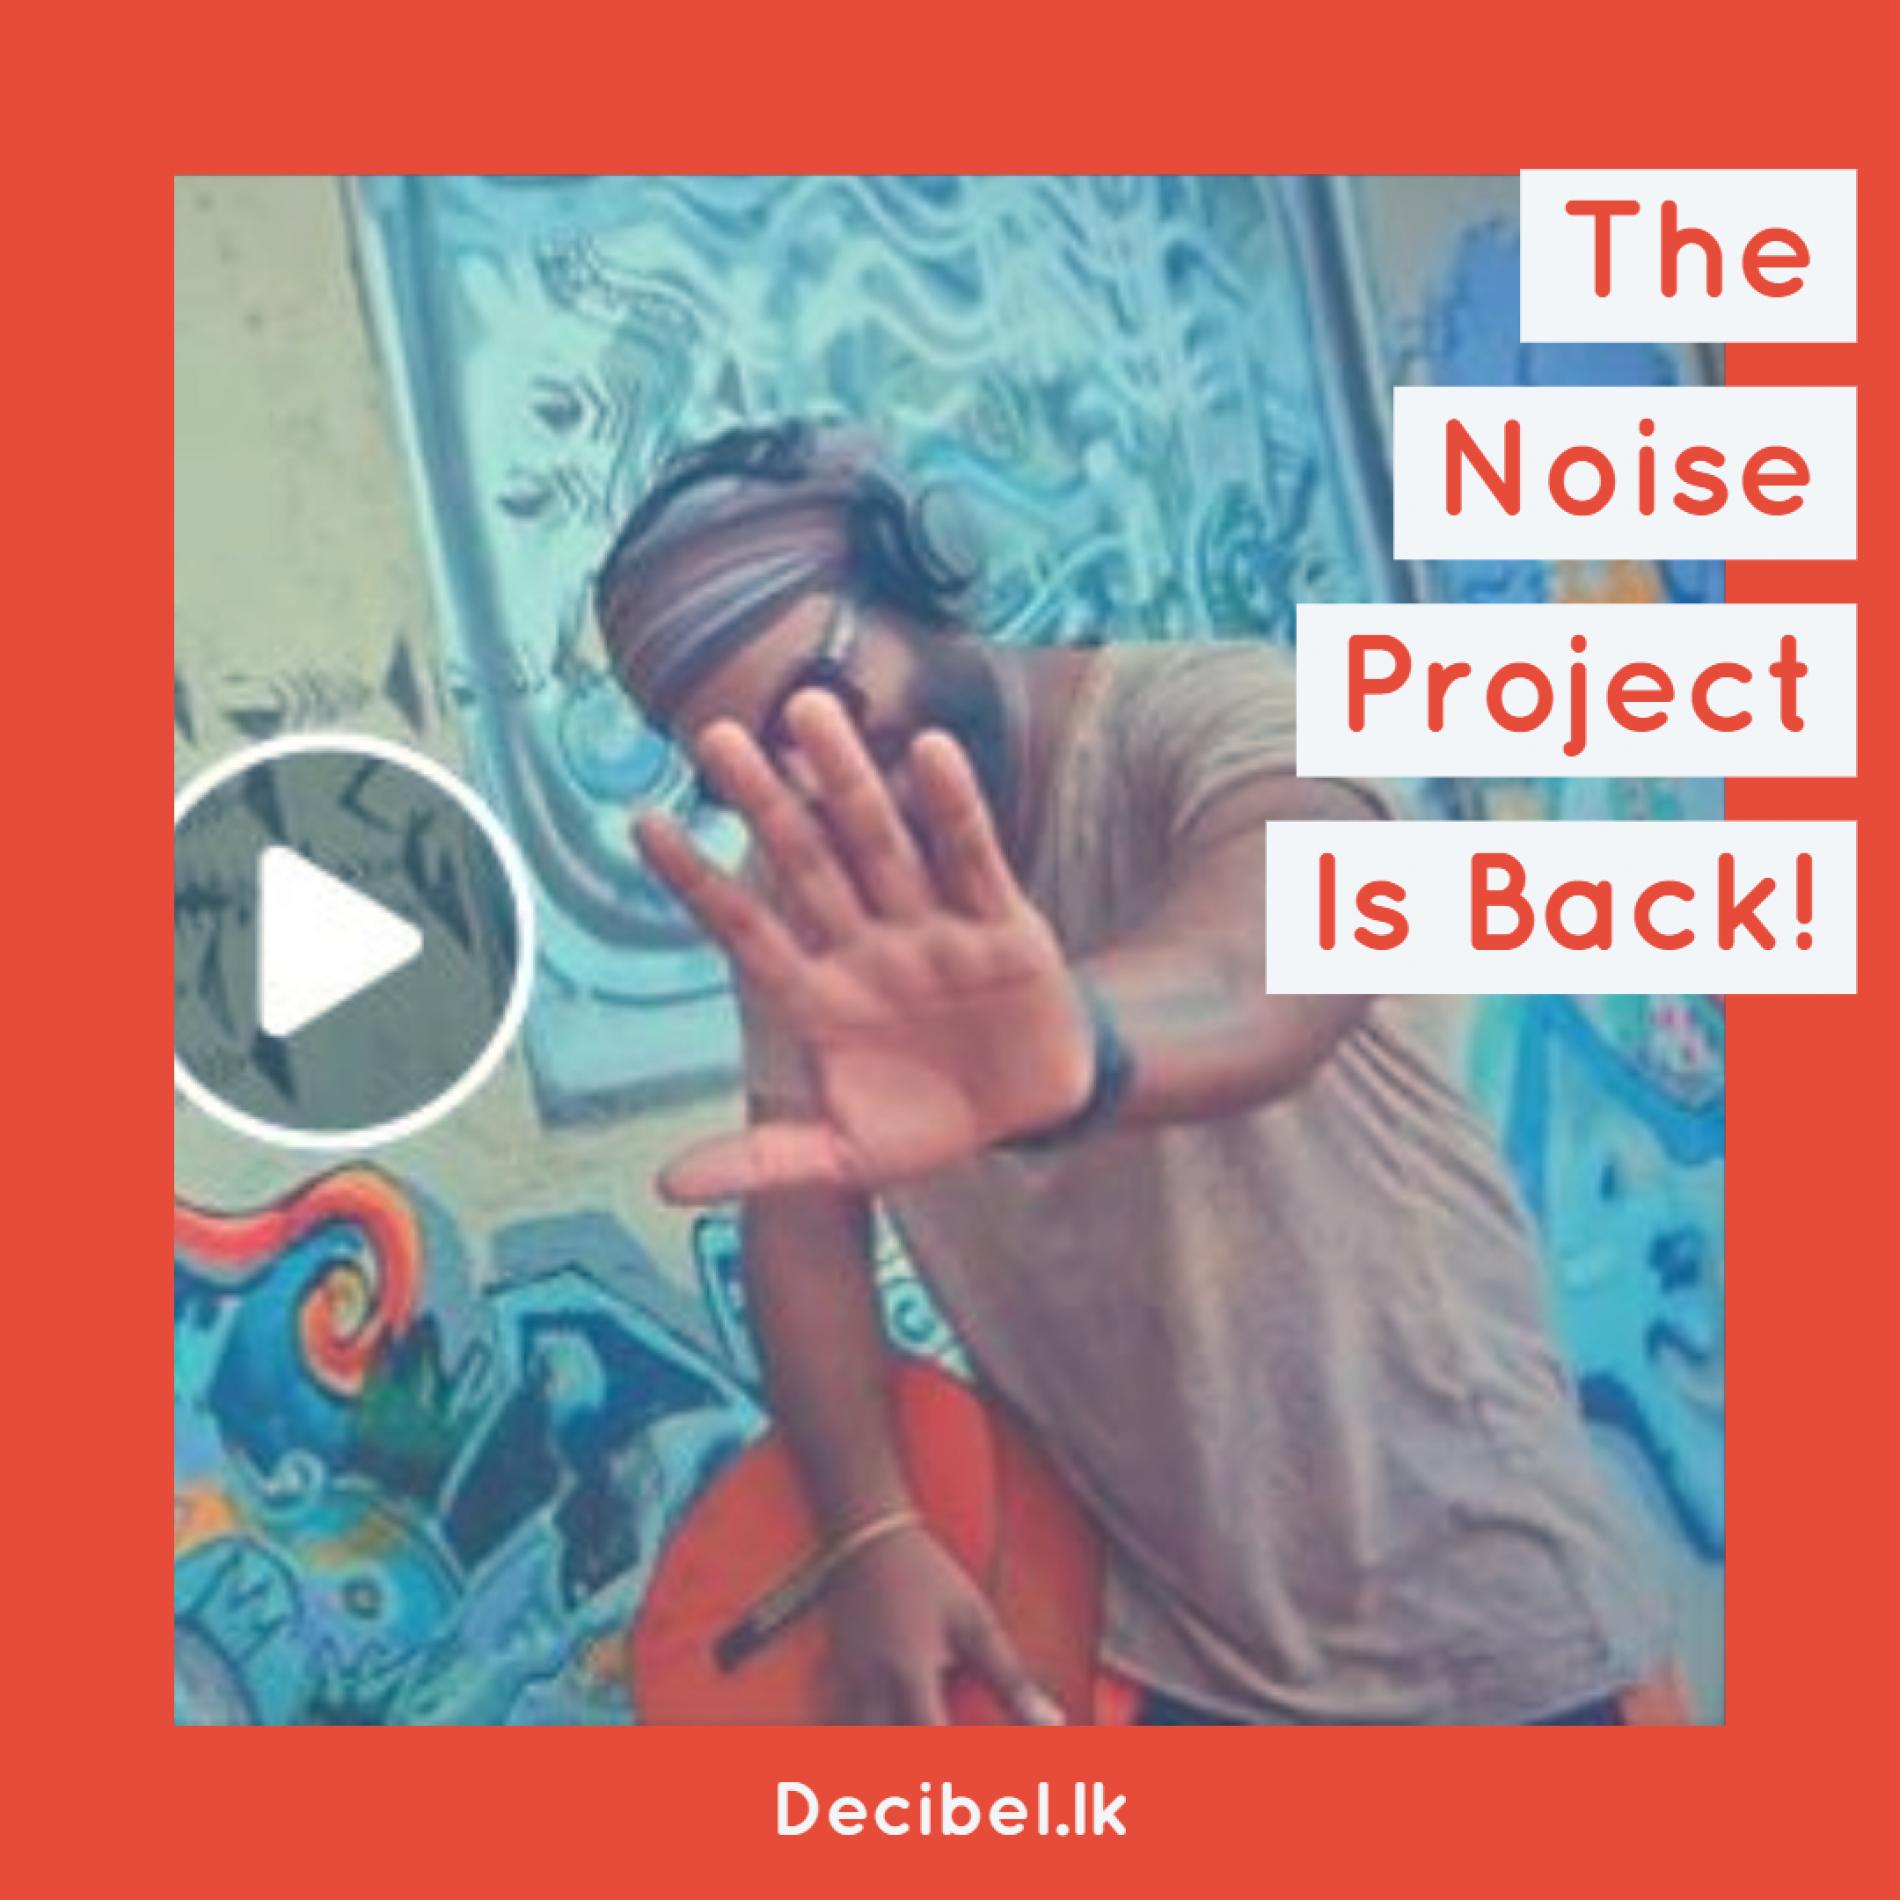 The Noise Project Is Back